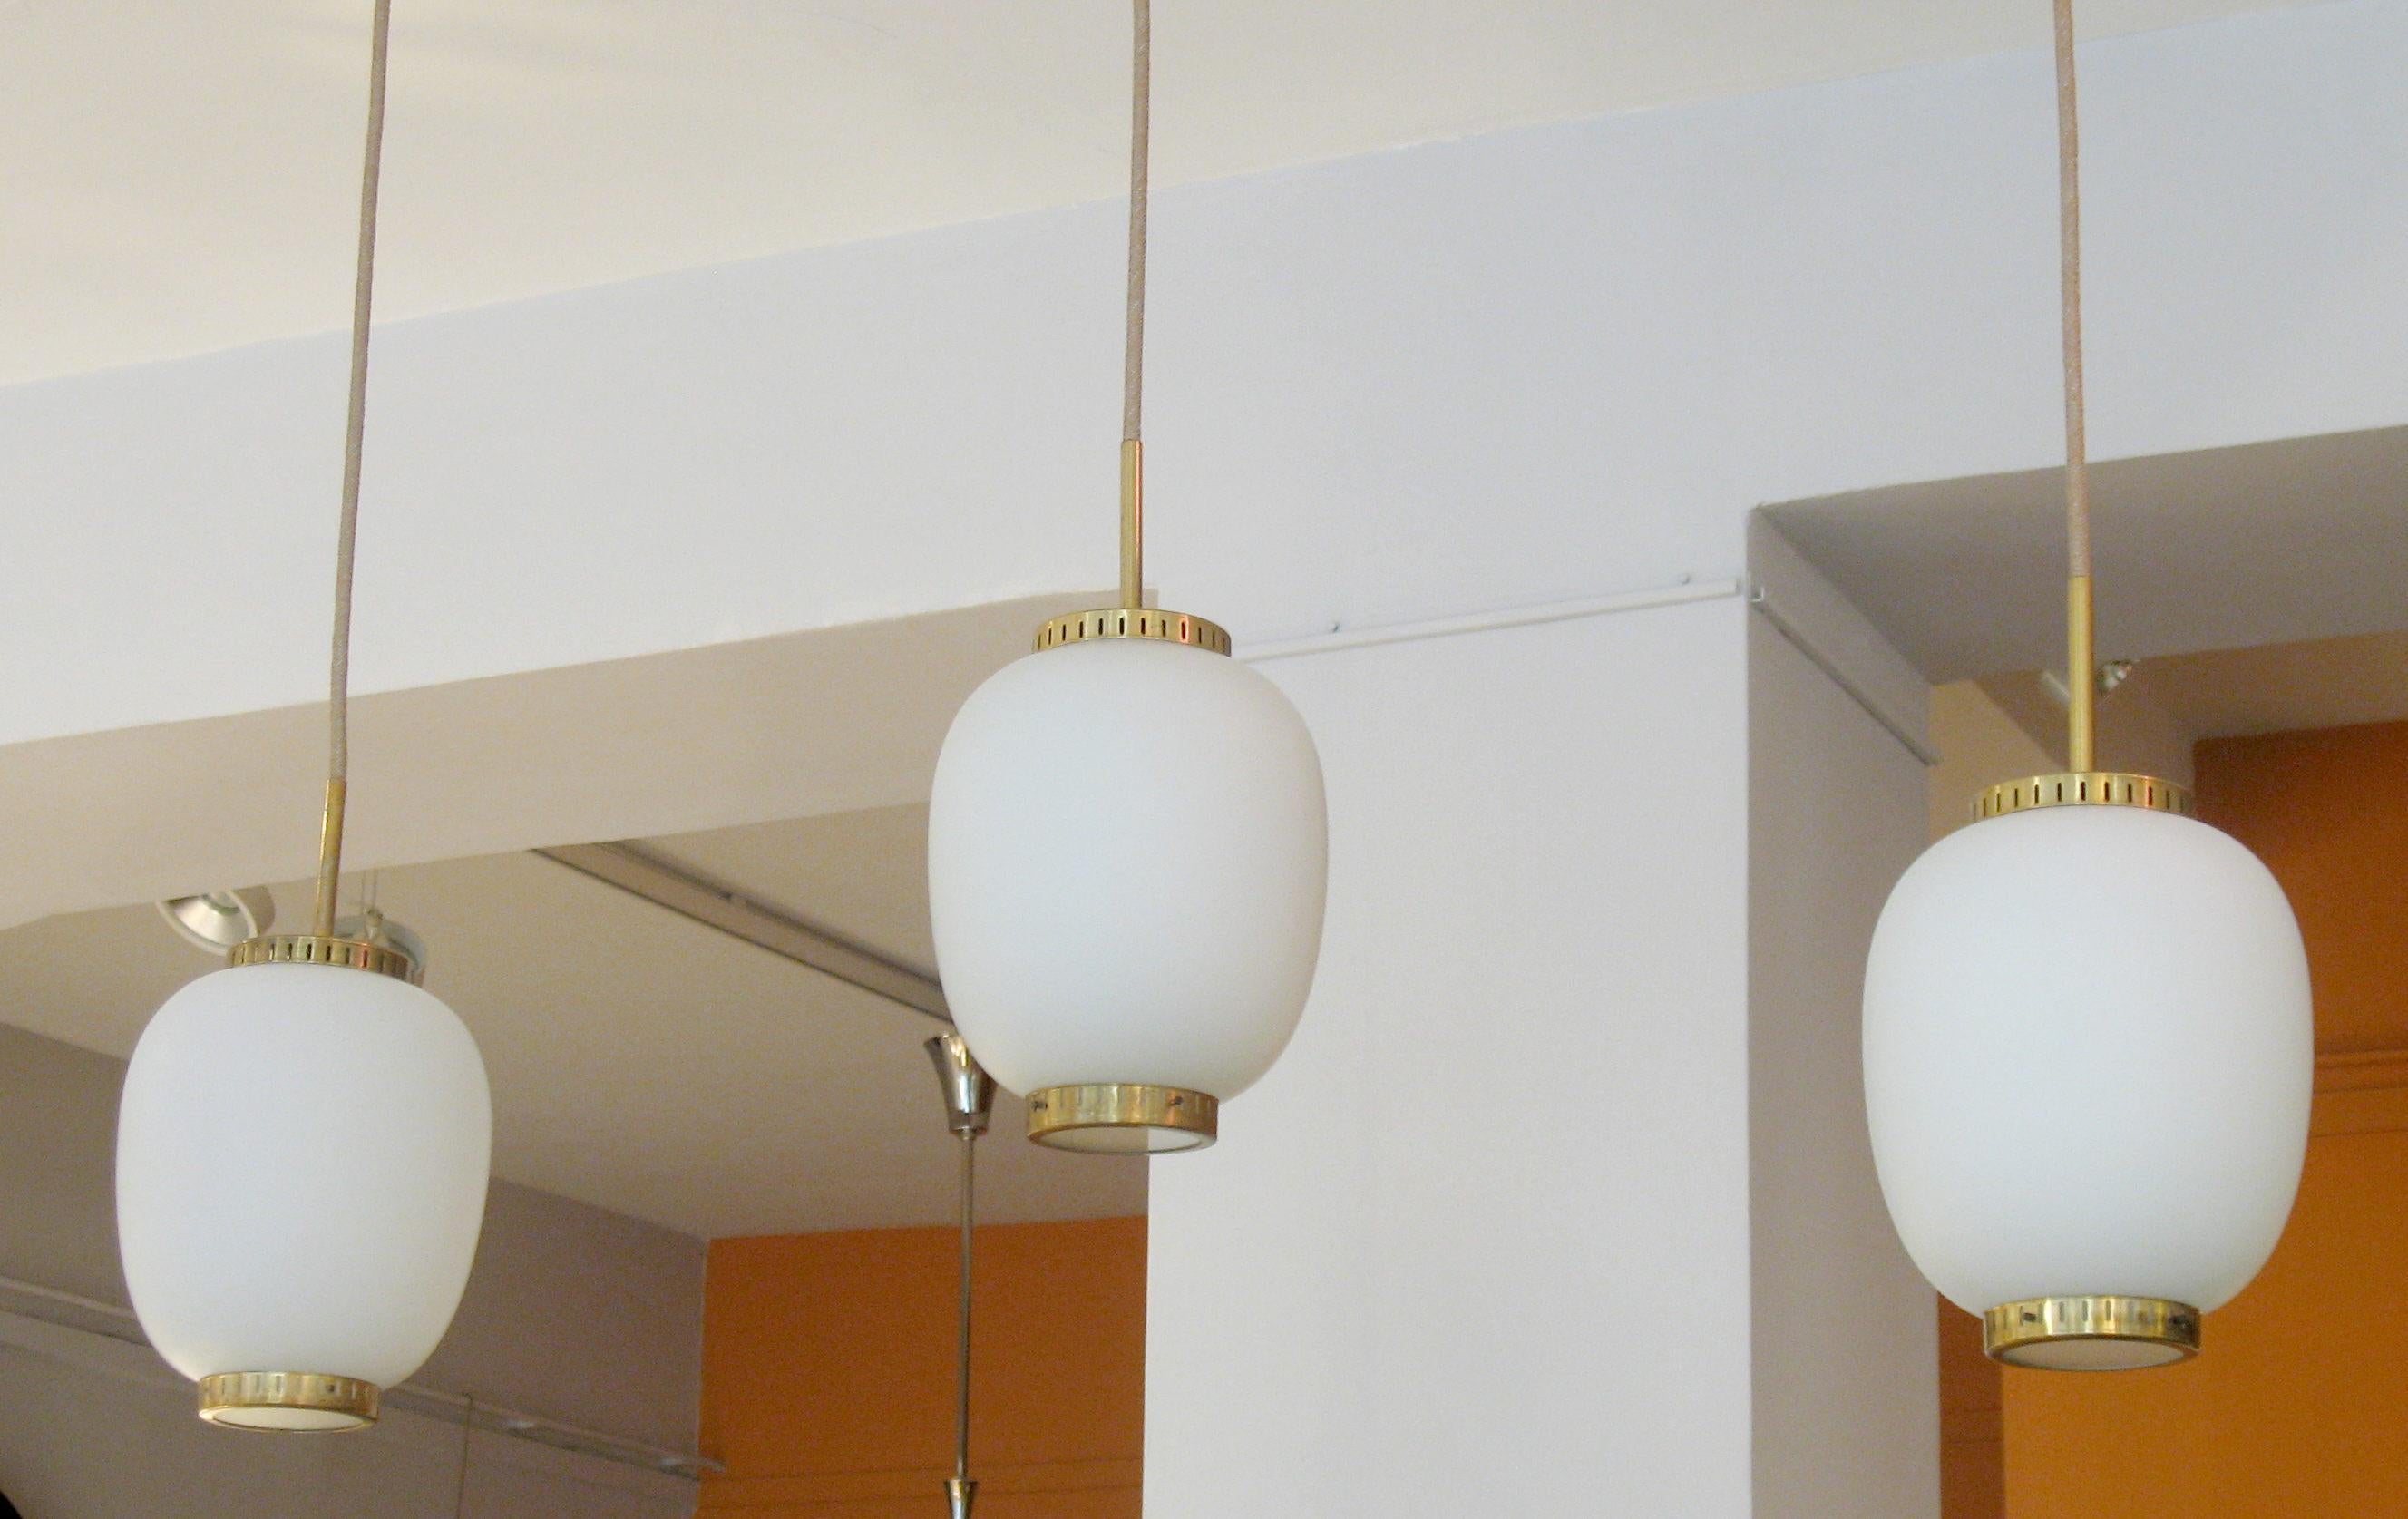 Collection of 5 small opaline glass and brass ceiling fixtures.
See dimensions below 
By Bent Karlby for Lyfa. 
Denmark, late 1950s.

Height of the opaline and brass disc)
H 9.4 in. (24 cm), D 7.8 in. (20 cm).